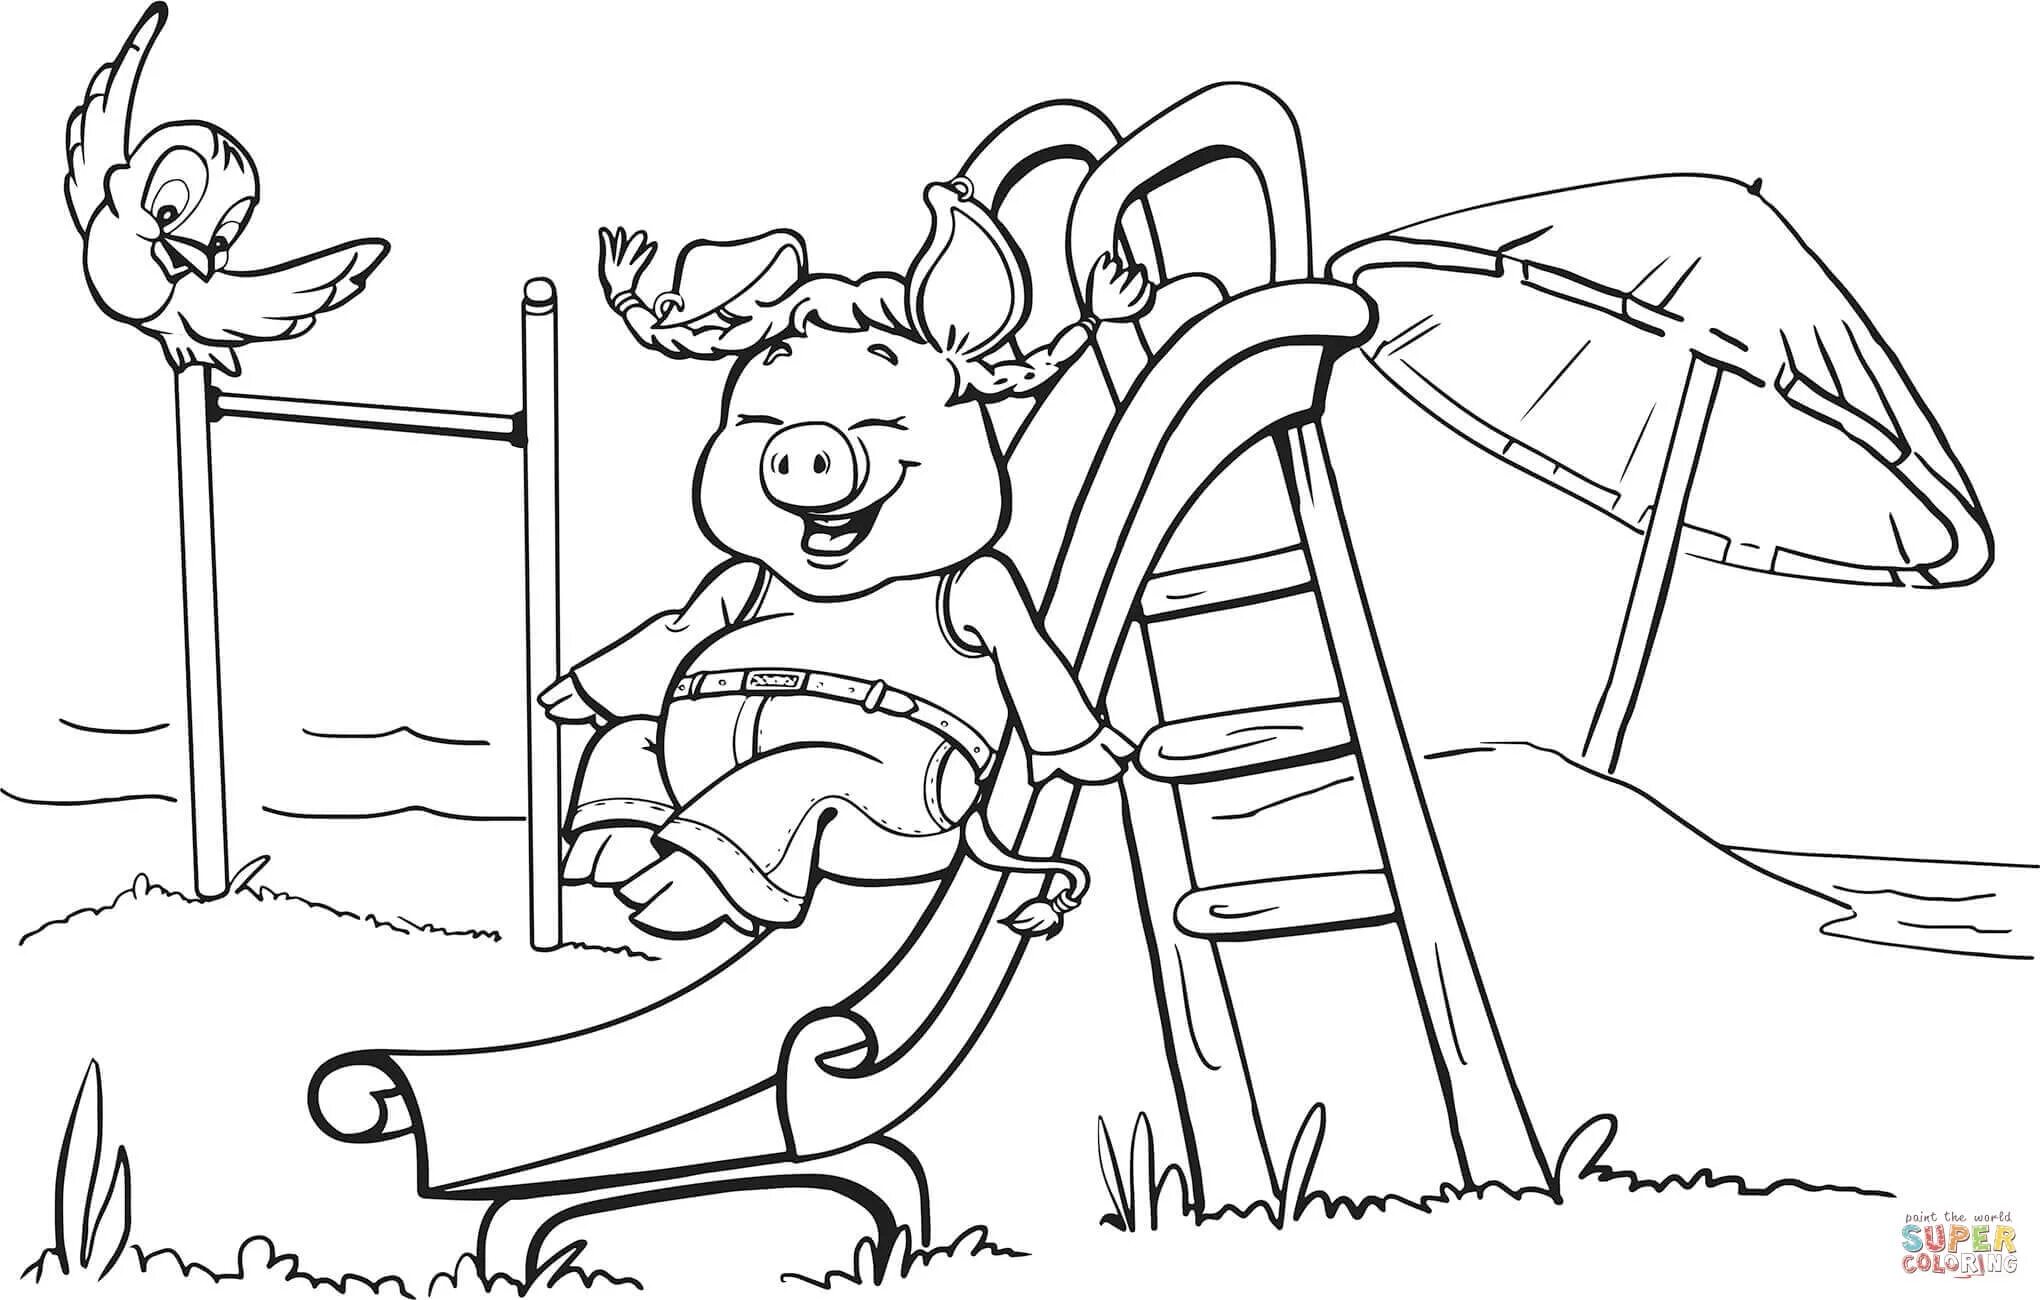 Coloring page area colorful-wish